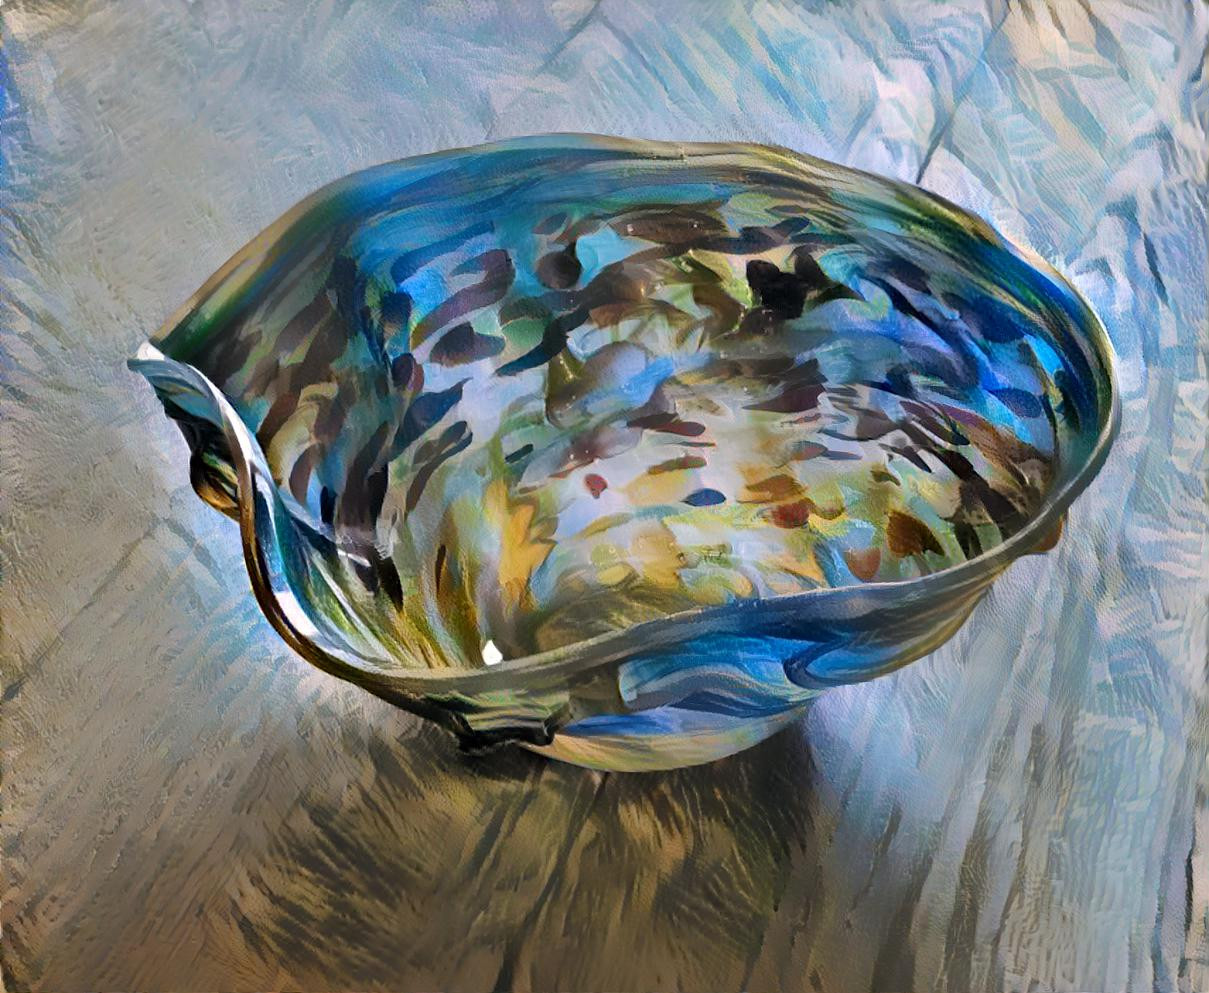 Glass art bowl overlaid with Tommy bahama